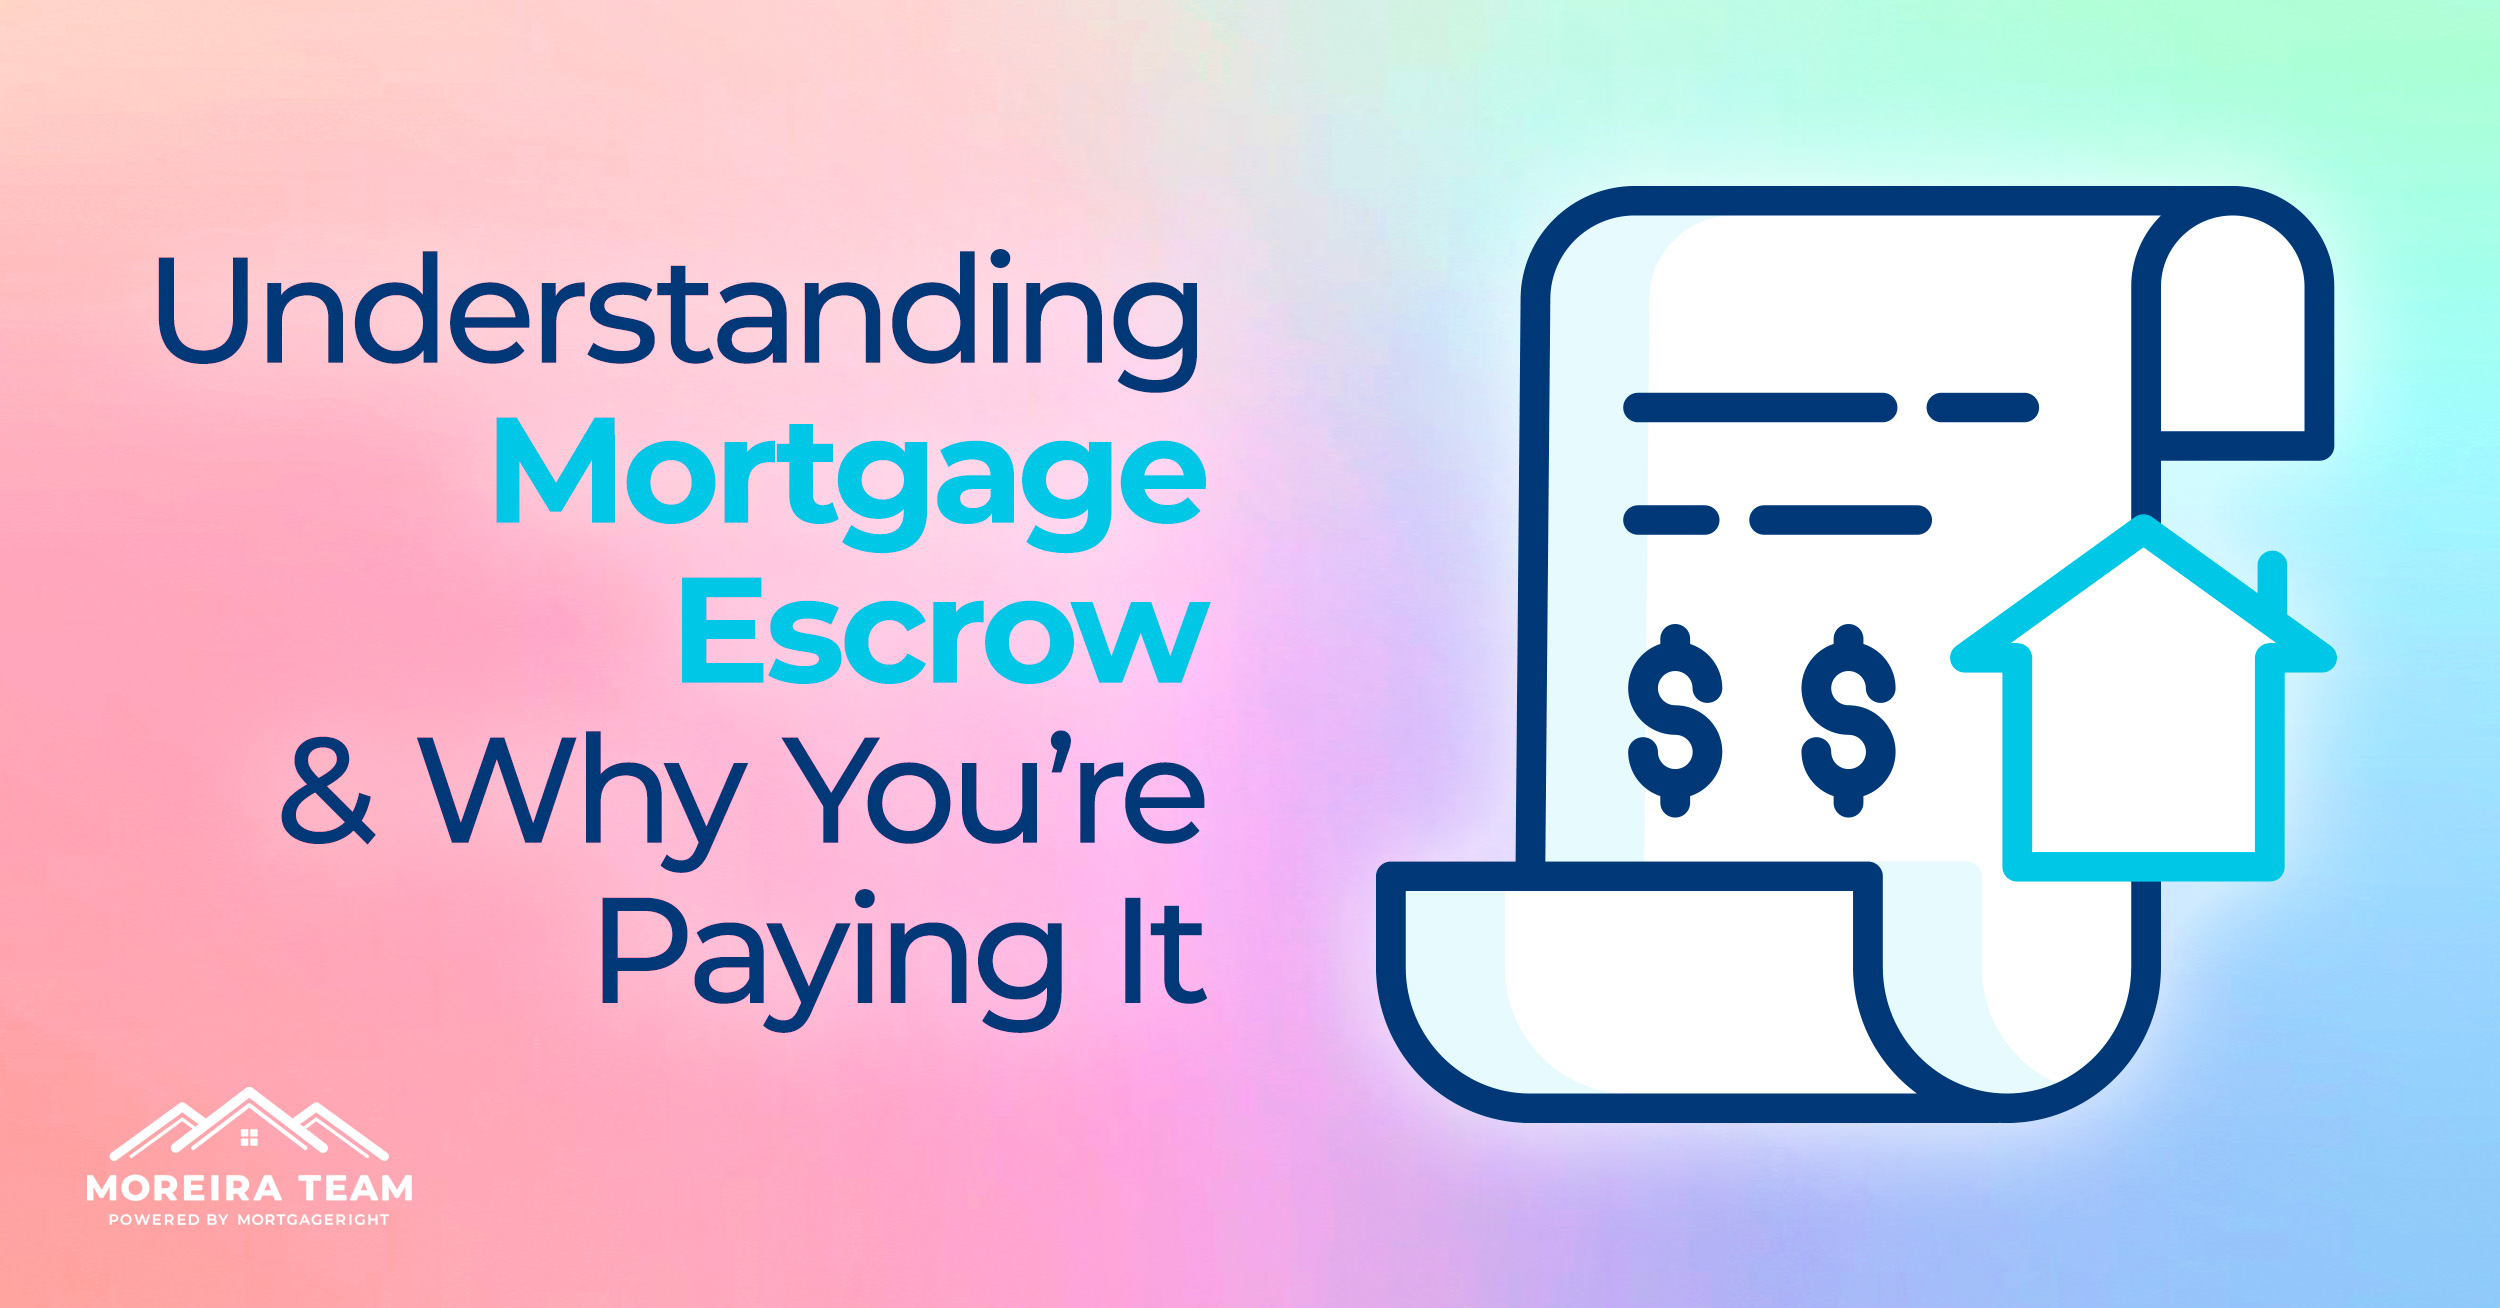 Understanding Mortgage Escrow and Why You’re Paying It